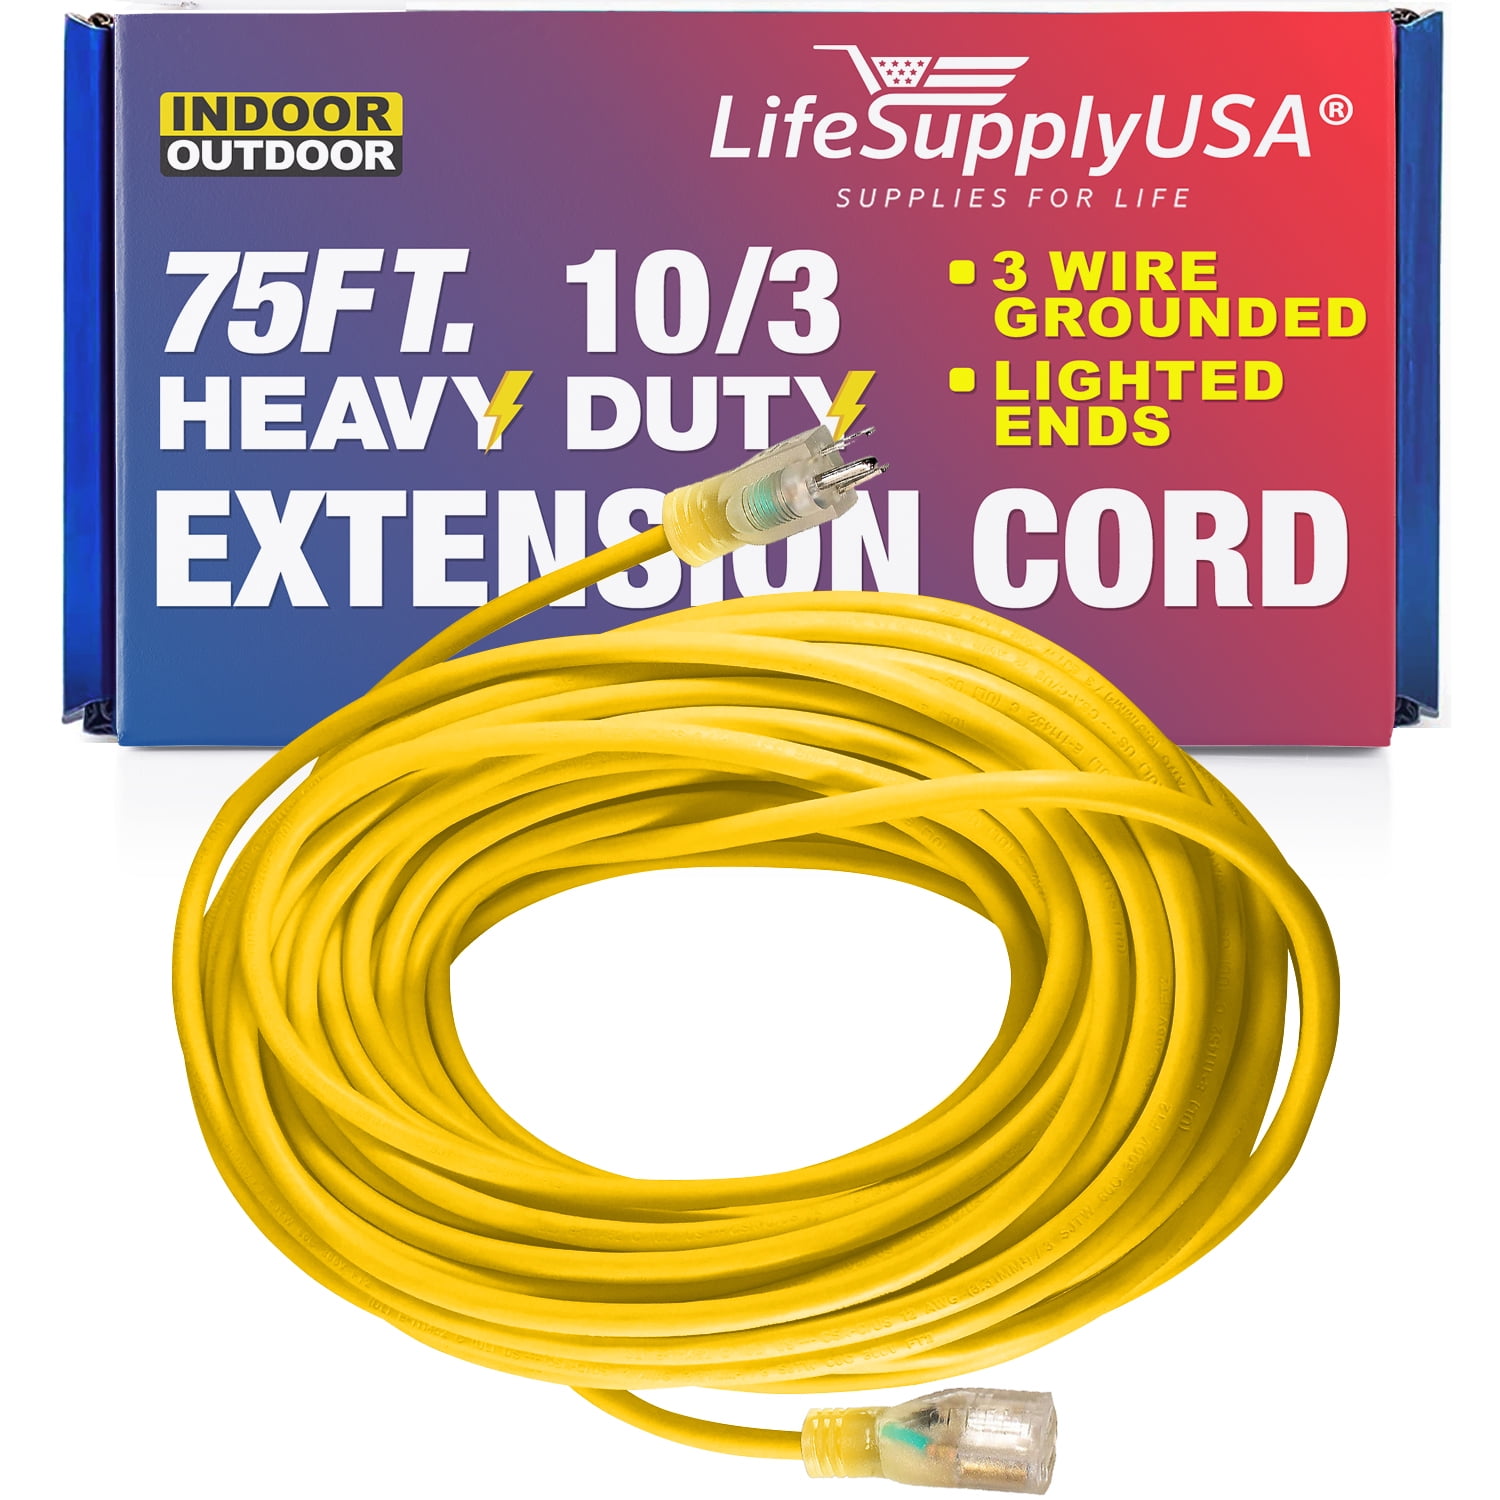 LifeSupplyUSA Outdoor/Indoor 10/3 Extension Cord 75ft, 15A, 125V, Yellow 